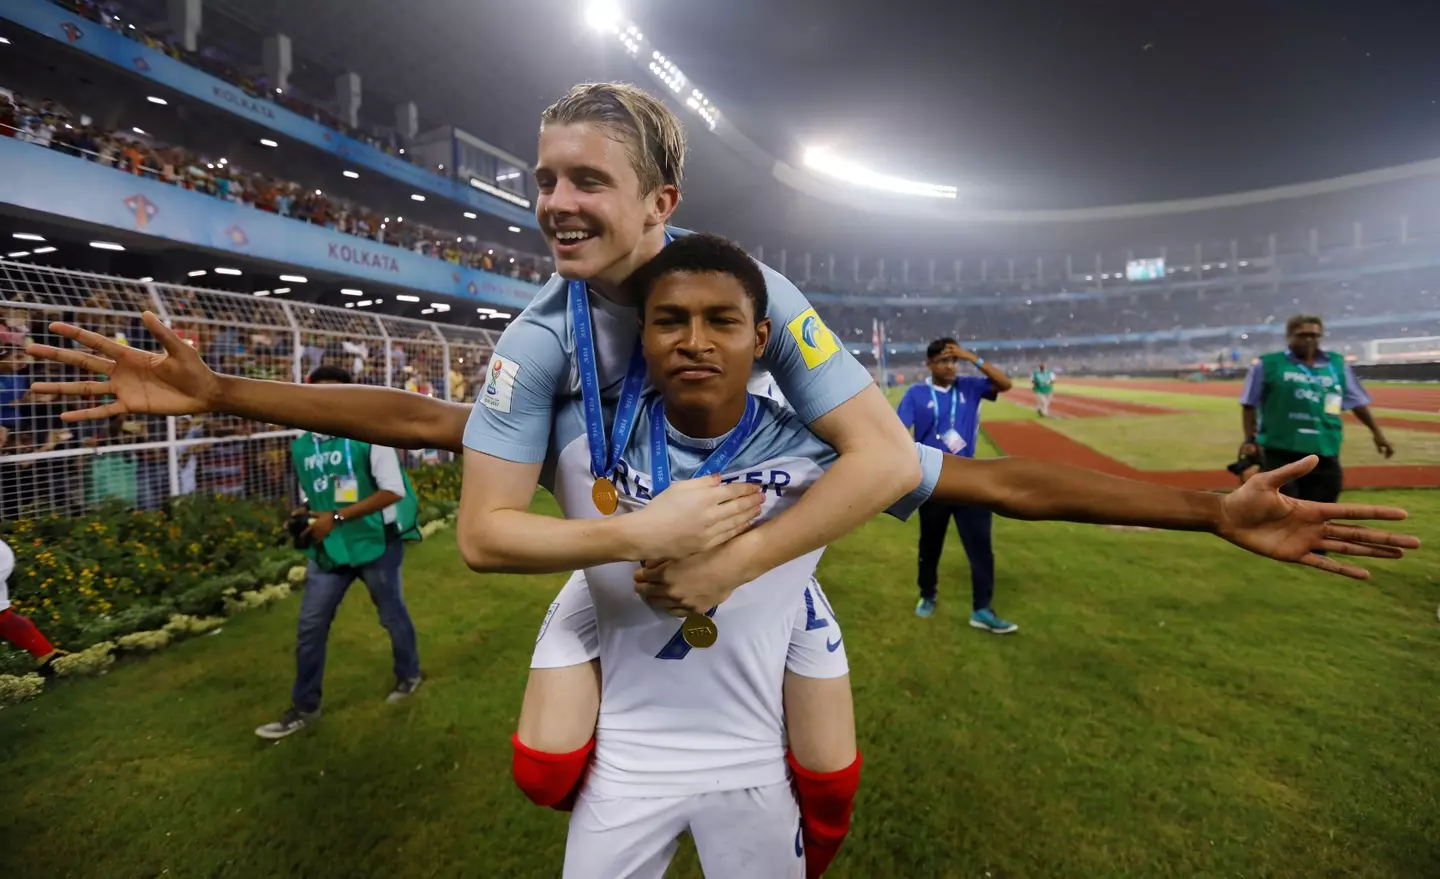 Rhian Brewster and Conor Gallagher celebrate winning the 2017 FIFA U-17 World Cup. Image credit: Alamy